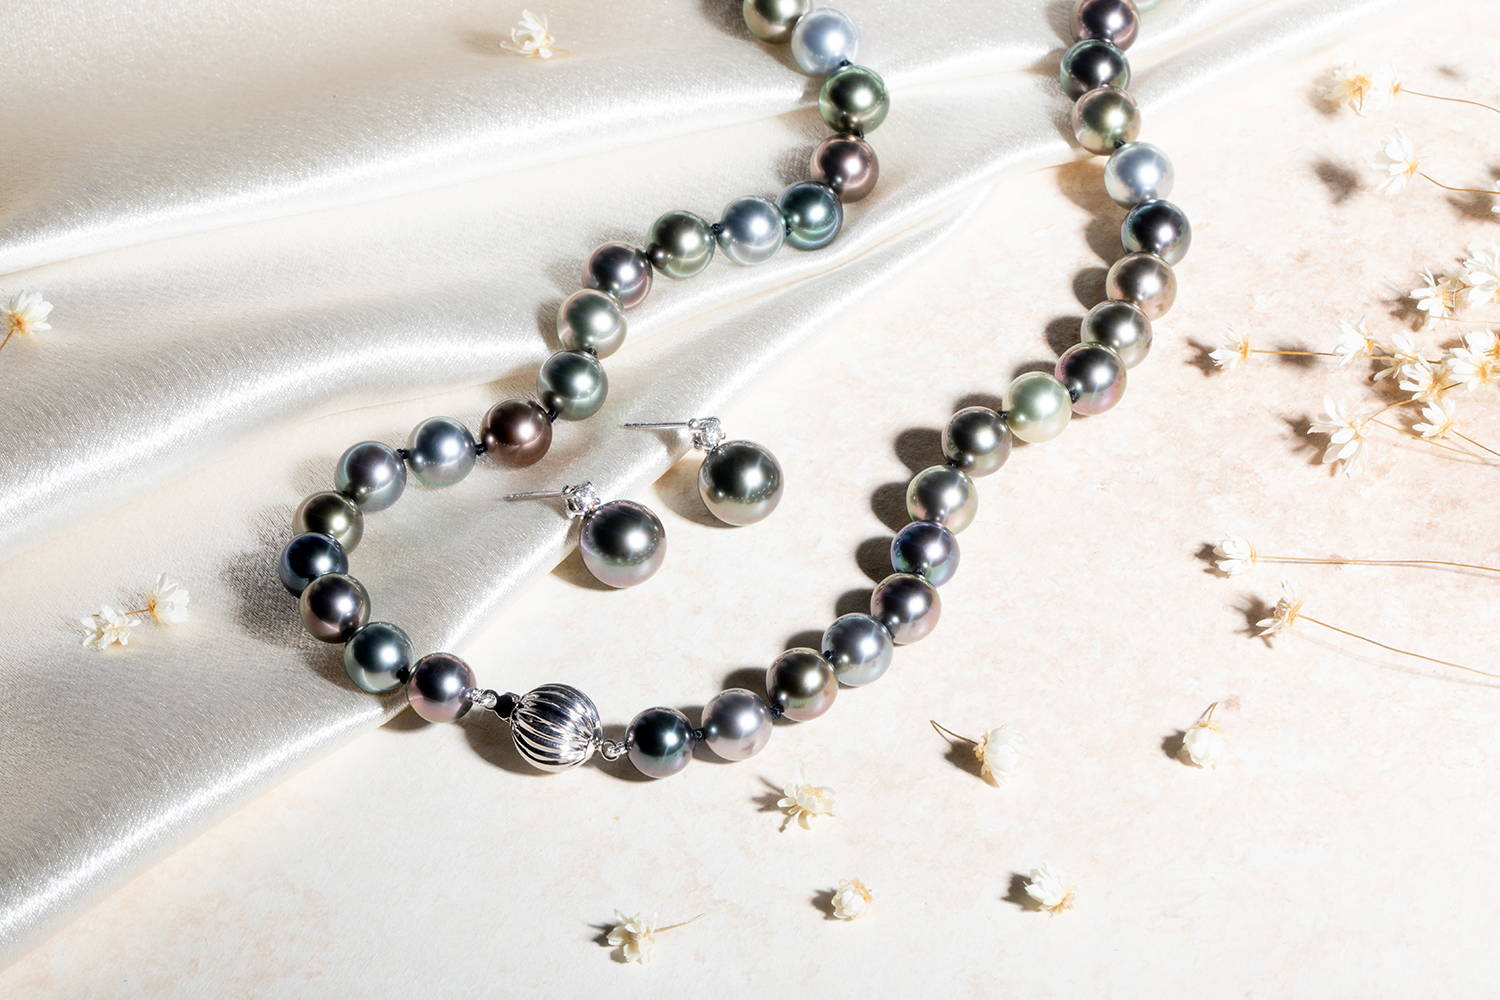 Expert Guide: 7 Valuable Tips to Identify Real Pearls from